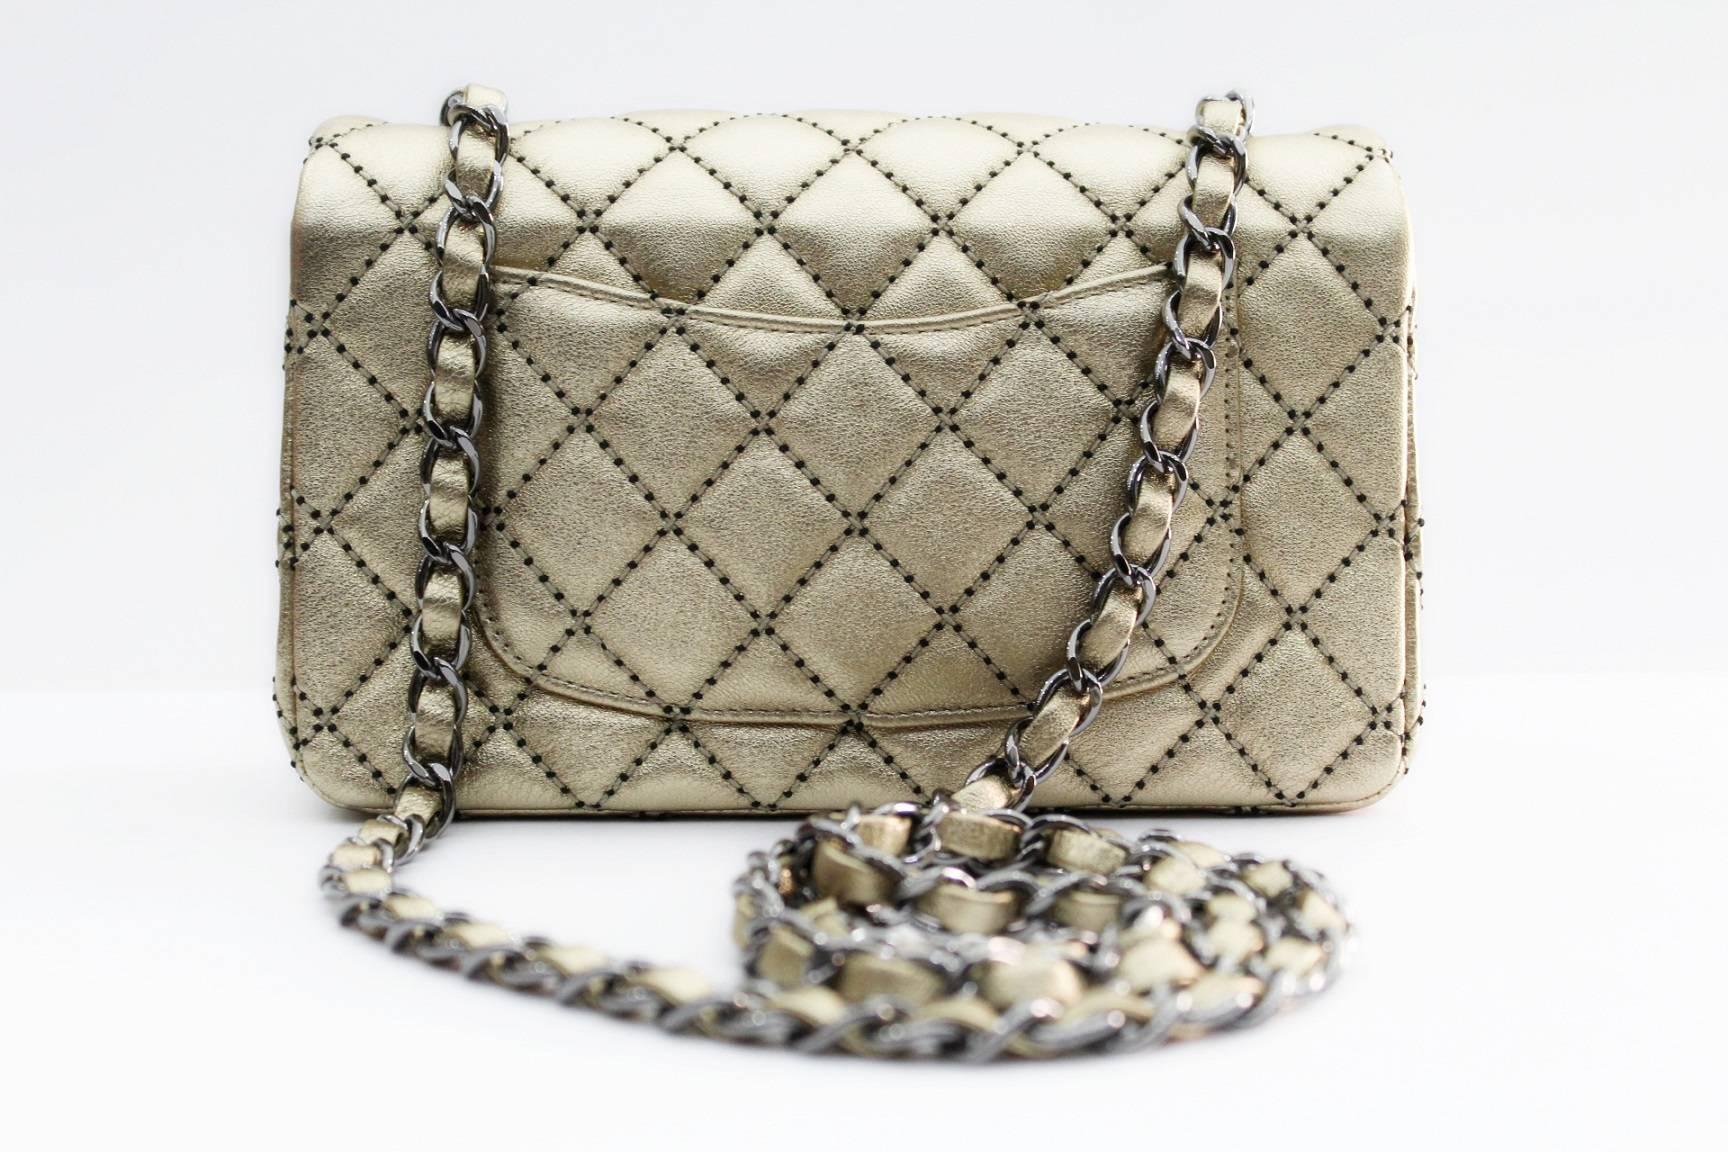 This adorable Chanel Gold/Black Quilted Lambskin Leather New Mini Flap Bag is in a mini size that amazingly holds your cell phone, keys, and lip gloss. It also features an inside flat pocket that fits cards or money as well as one zip pocket for